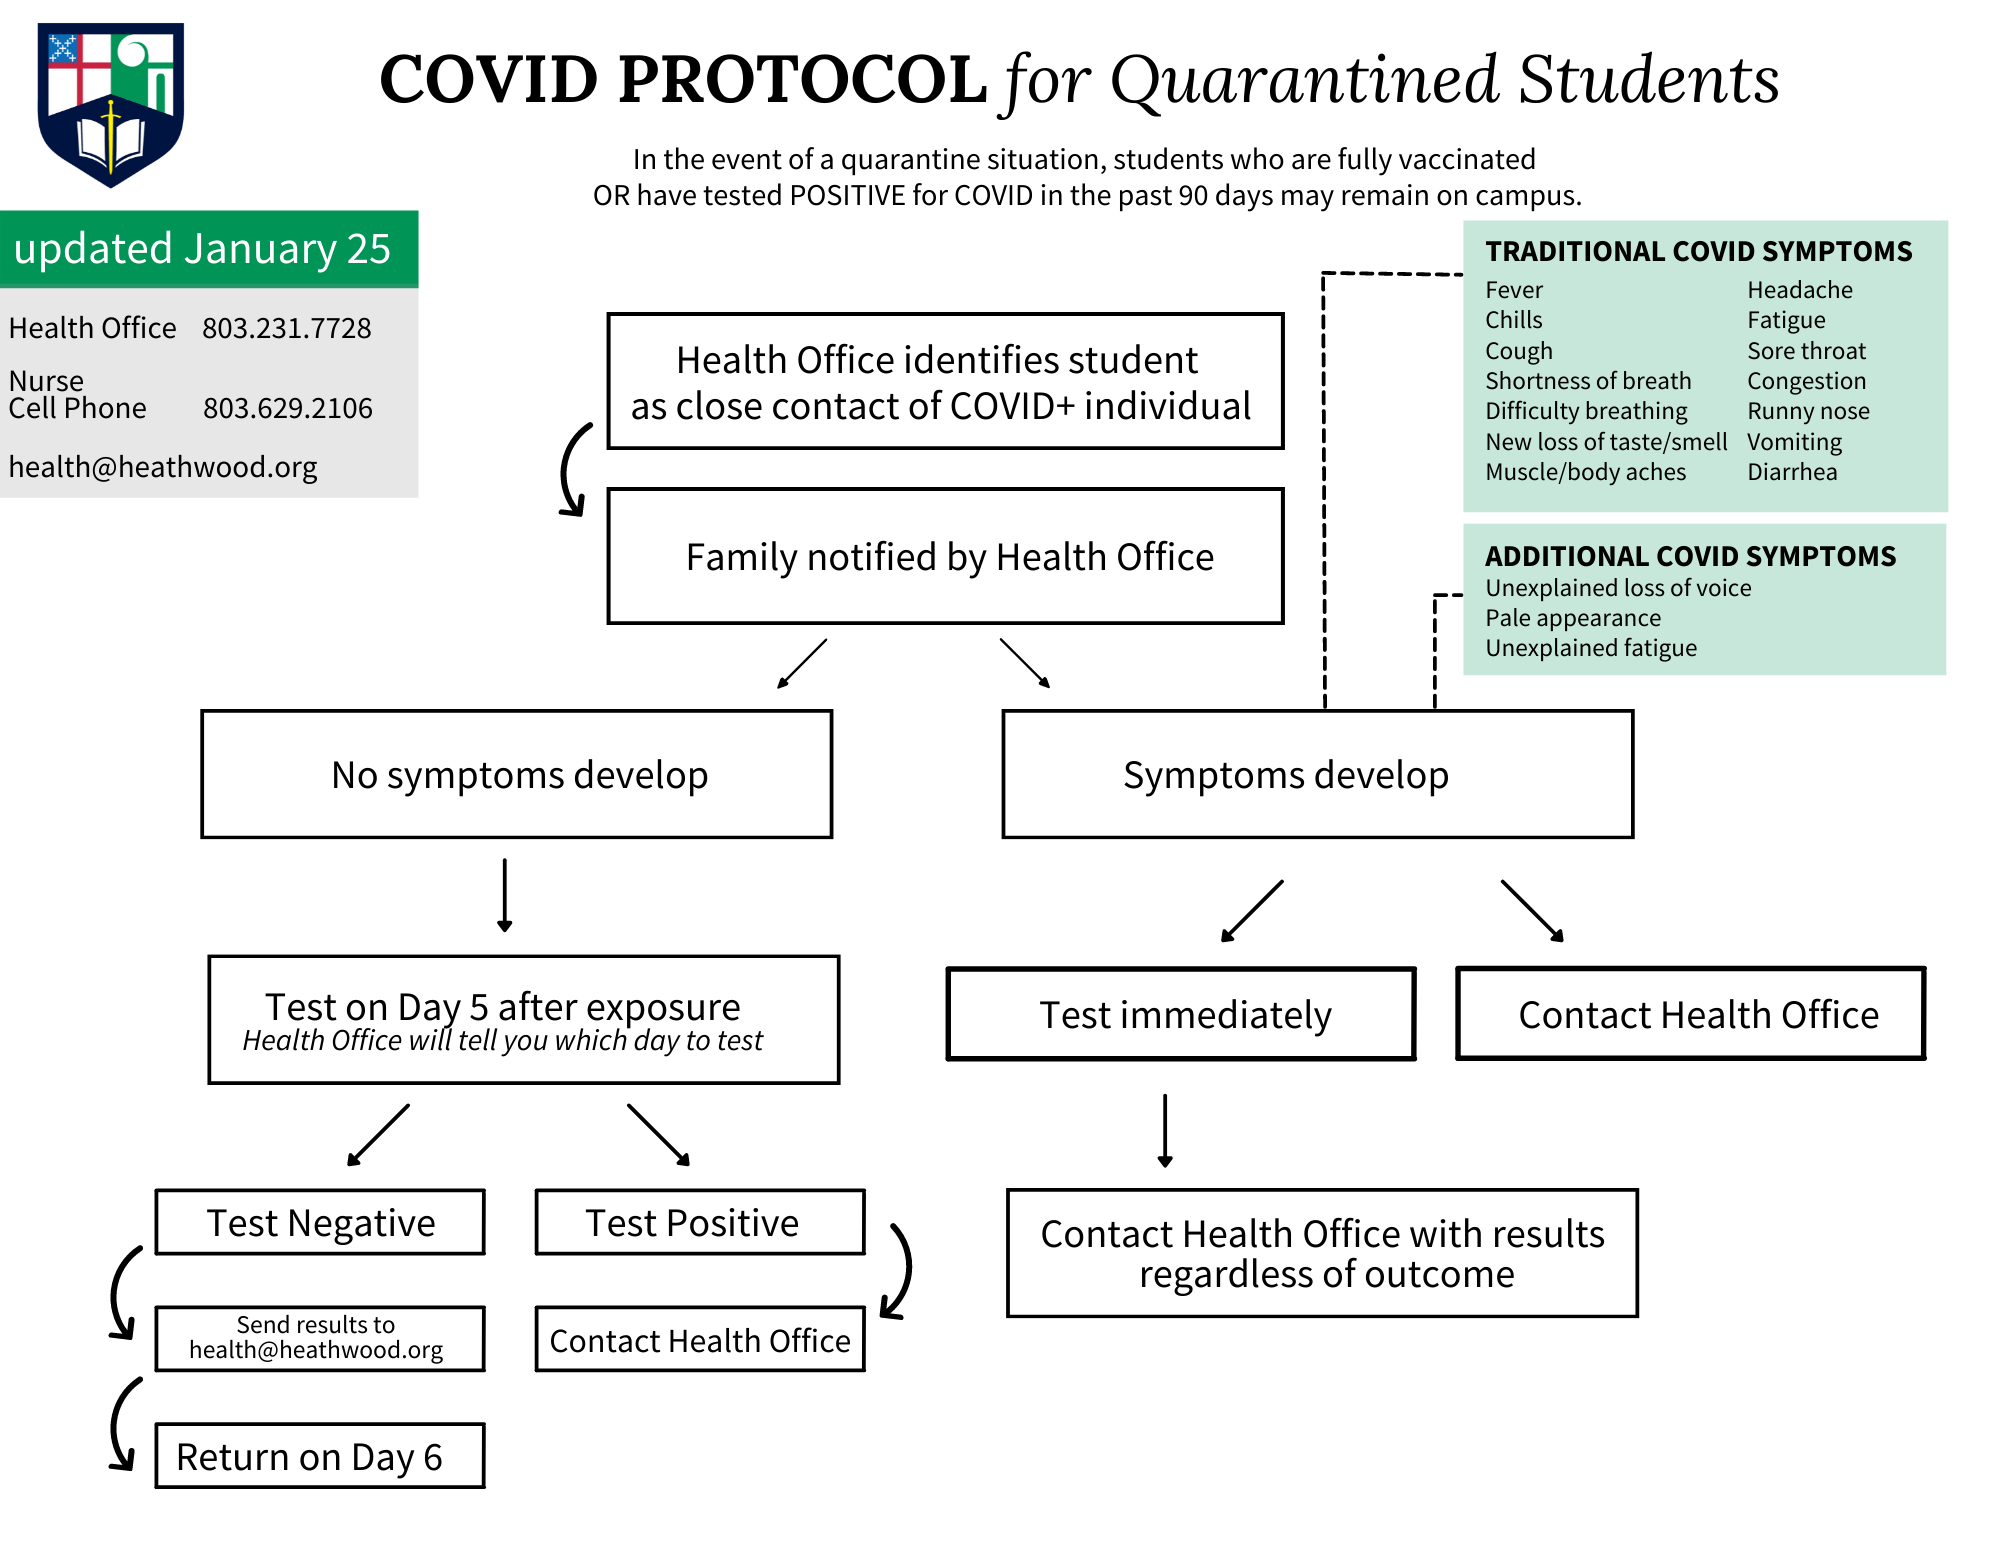 COVID Protocols for Quarantined students and faculty